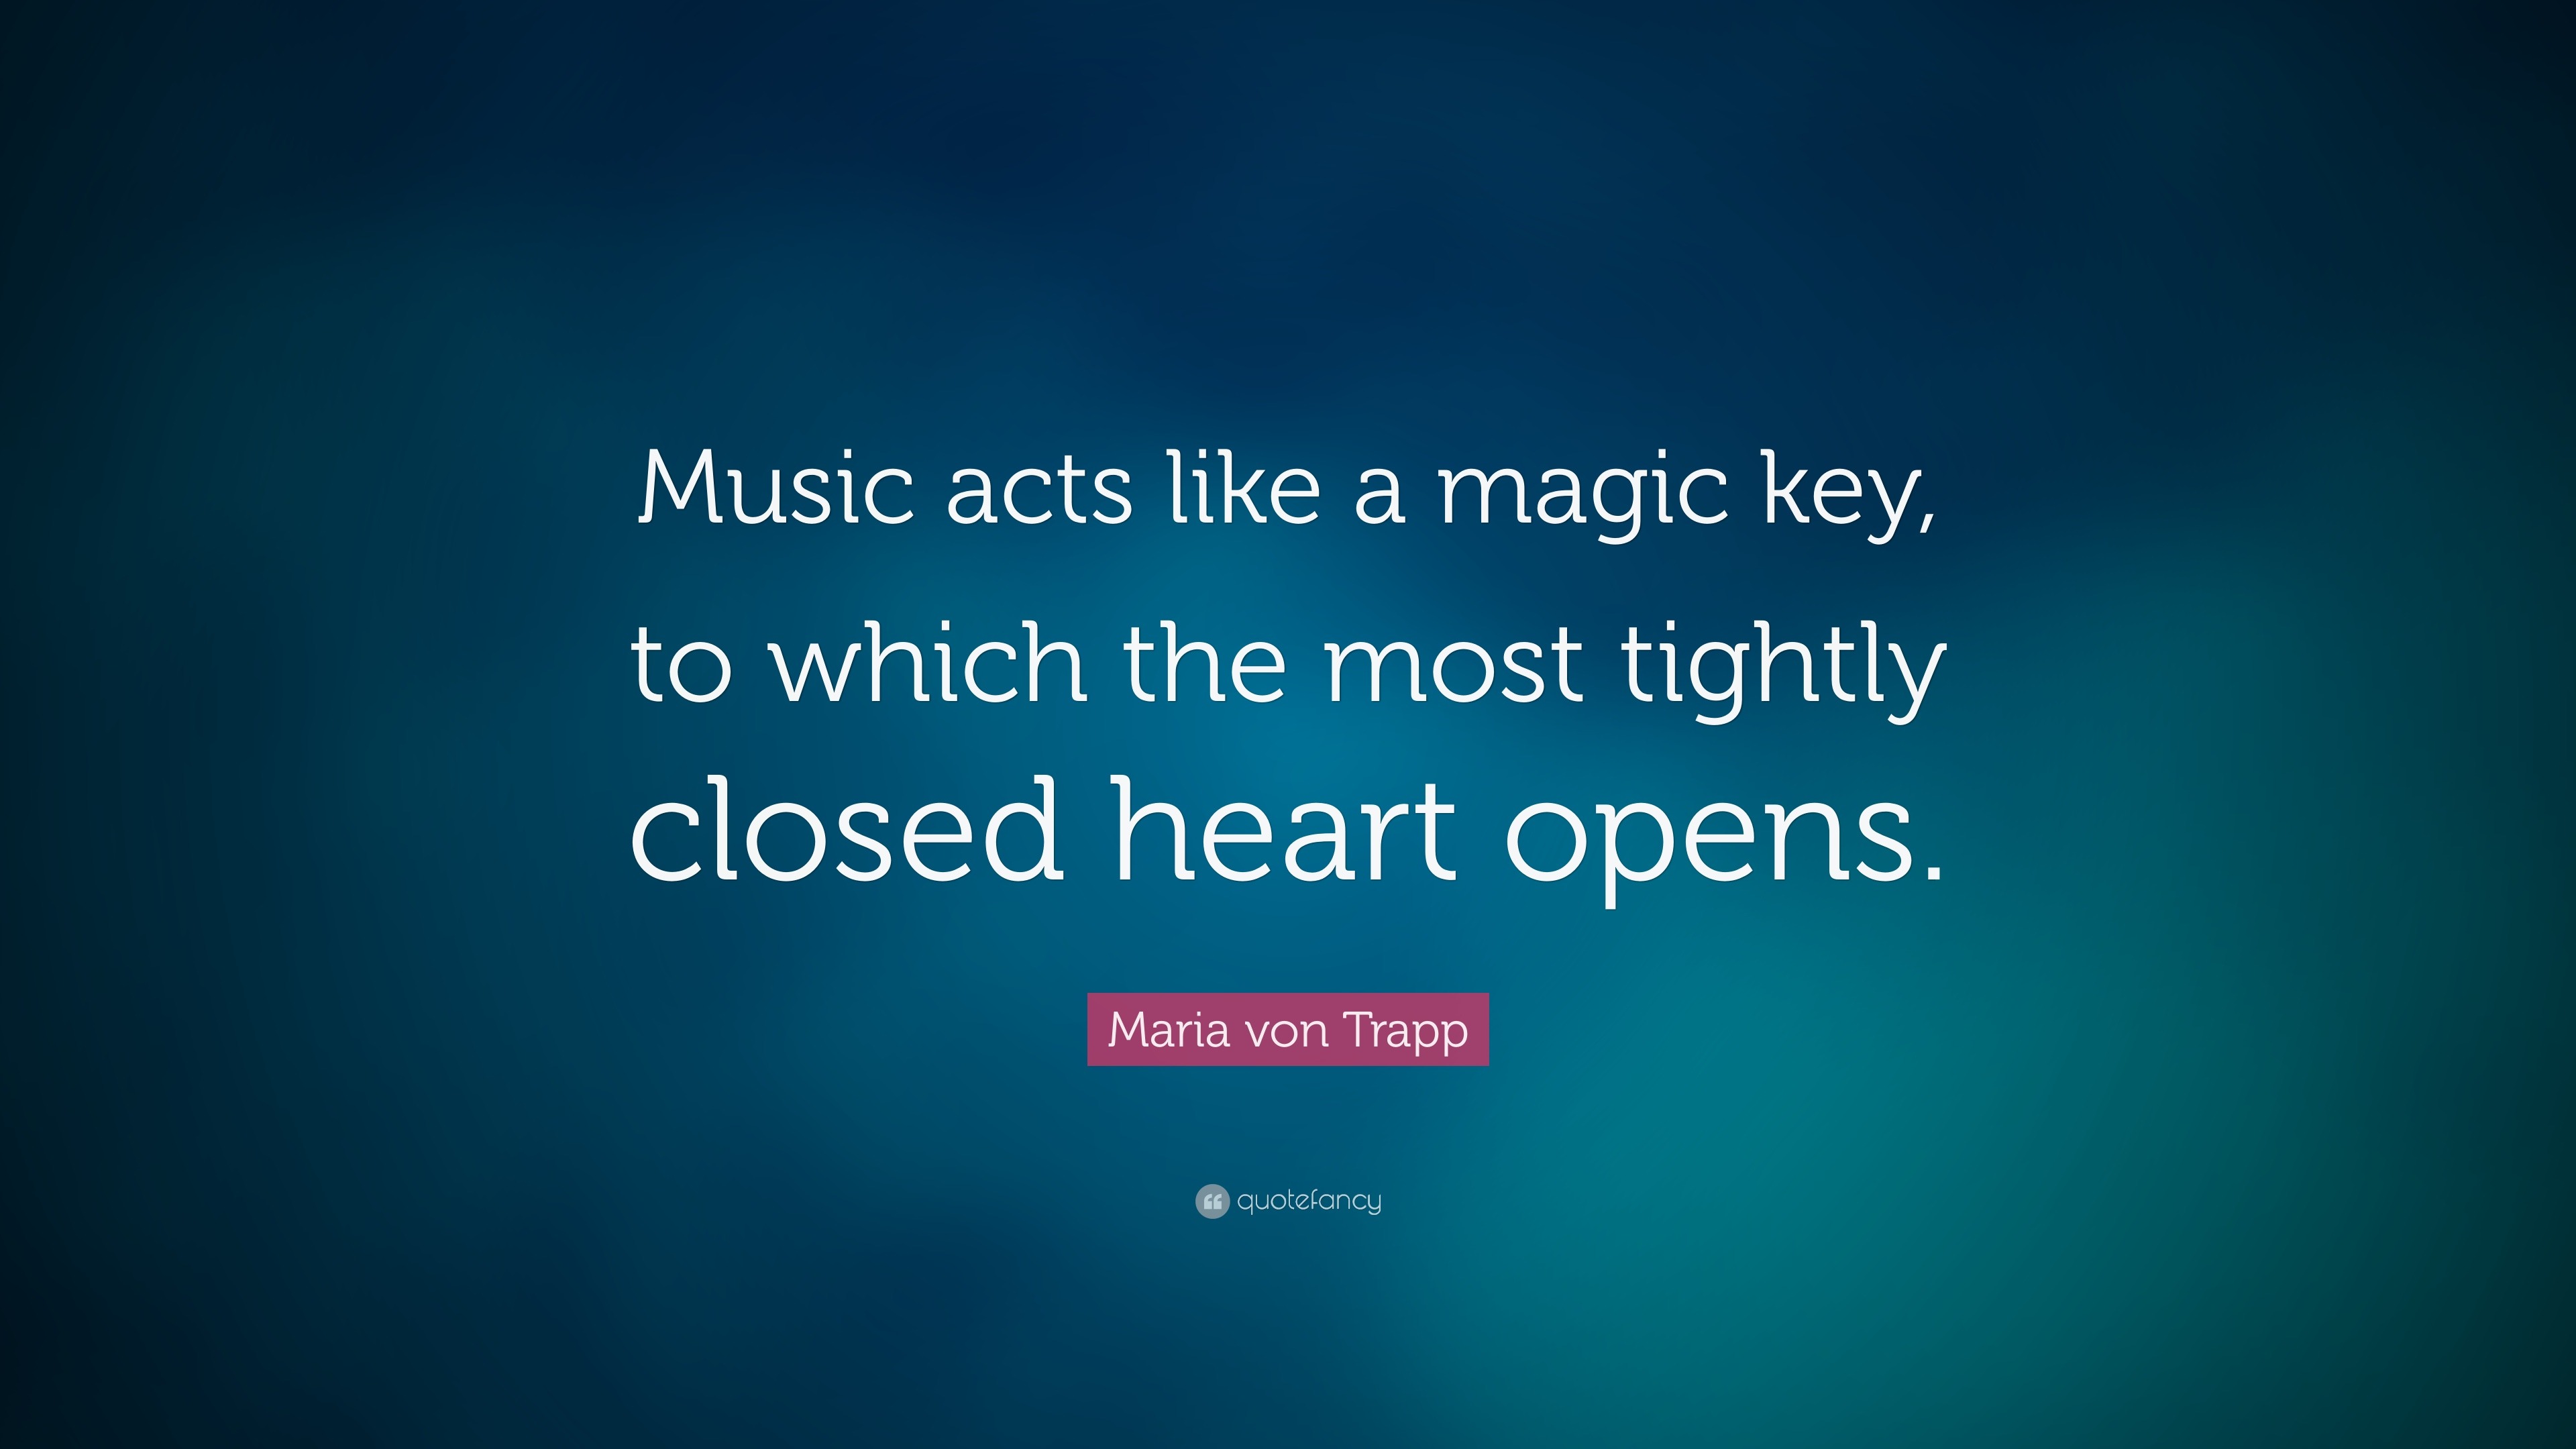 Maria von Trapp Quote: “Music acts like a magic key, to which the most tightly ...